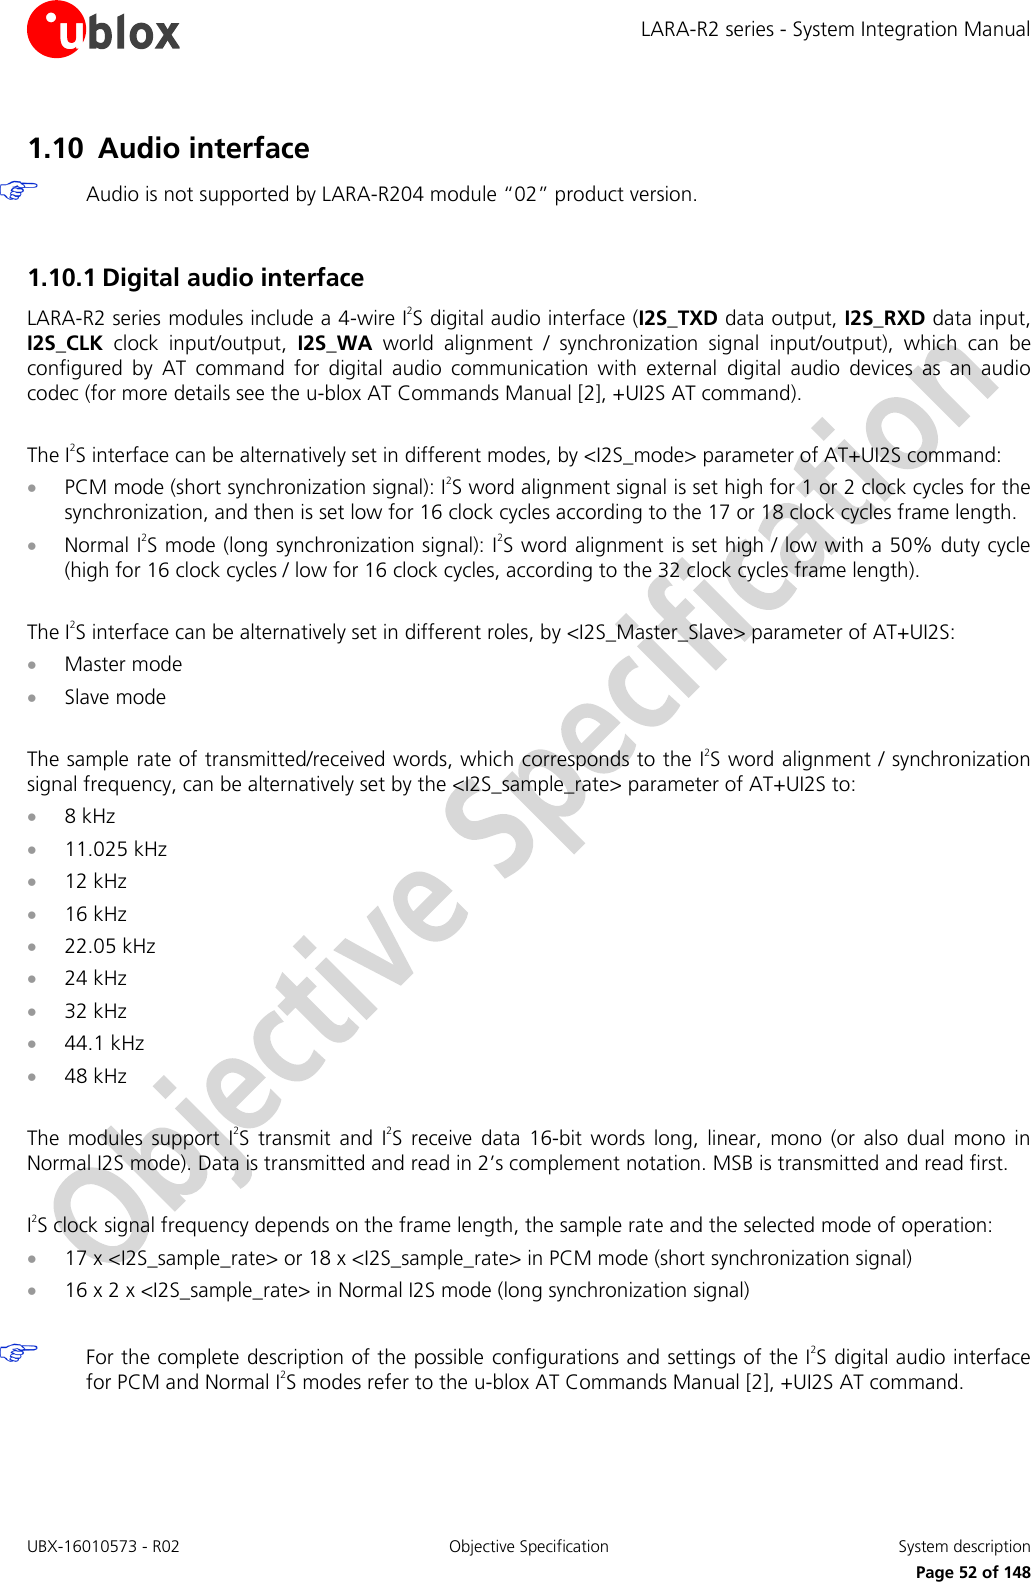 LARA-R2 series - System Integration Manual UBX-16010573 - R02  Objective Specification  System description     Page 52 of 148 1.10 Audio interface  Audio is not supported by LARA-R204 module “02” product version.  1.10.1 Digital audio interface  LARA-R2 series modules include a 4-wire I2S digital audio interface (I2S_TXD data output, I2S_RXD data input, I2S_CLK  clock  input/output,  I2S_WA  world  alignment  /  synchronization  signal  input/output),  which  can  be configured  by  AT  command  for  digital  audio  communication  with  external  digital  audio  devices  as  an  audio codec (for more details see the u-blox AT Commands Manual [2], +UI2S AT command).  The I2S interface can be alternatively set in different modes, by &lt;I2S_mode&gt; parameter of AT+UI2S command:  PCM mode (short synchronization signal): I2S word alignment signal is set high for 1 or 2 clock cycles for the synchronization, and then is set low for 16 clock cycles according to the 17 or 18 clock cycles frame length.  Normal I2S mode (long synchronization signal): I2S word alignment is set high / low with a 50% duty cycle (high for 16 clock cycles / low for 16 clock cycles, according to the 32 clock cycles frame length).  The I2S interface can be alternatively set in different roles, by &lt;I2S_Master_Slave&gt; parameter of AT+UI2S:  Master mode  Slave mode  The sample rate of transmitted/received words, which corresponds to the I2S word alignment / synchronization signal frequency, can be alternatively set by the &lt;I2S_sample_rate&gt; parameter of AT+UI2S to:  8 kHz  11.025 kHz  12 kHz  16 kHz  22.05 kHz  24 kHz  32 kHz  44.1 kHz  48 kHz  The  modules  support  I2S  transmit  and  I2S  receive  data  16-bit  words  long,  linear,  mono  (or  also  dual  mono  in Normal I2S mode). Data is transmitted and read in 2’s complement notation. MSB is transmitted and read first.  I2S clock signal frequency depends on the frame length, the sample rate and the selected mode of operation:  17 x &lt;I2S_sample_rate&gt; or 18 x &lt;I2S_sample_rate&gt; in PCM mode (short synchronization signal)  16 x 2 x &lt;I2S_sample_rate&gt; in Normal I2S mode (long synchronization signal)   For the complete description of the possible  configurations and settings of the I2S digital audio interface for PCM and Normal I2S modes refer to the u-blox AT Commands Manual [2], +UI2S AT command.  